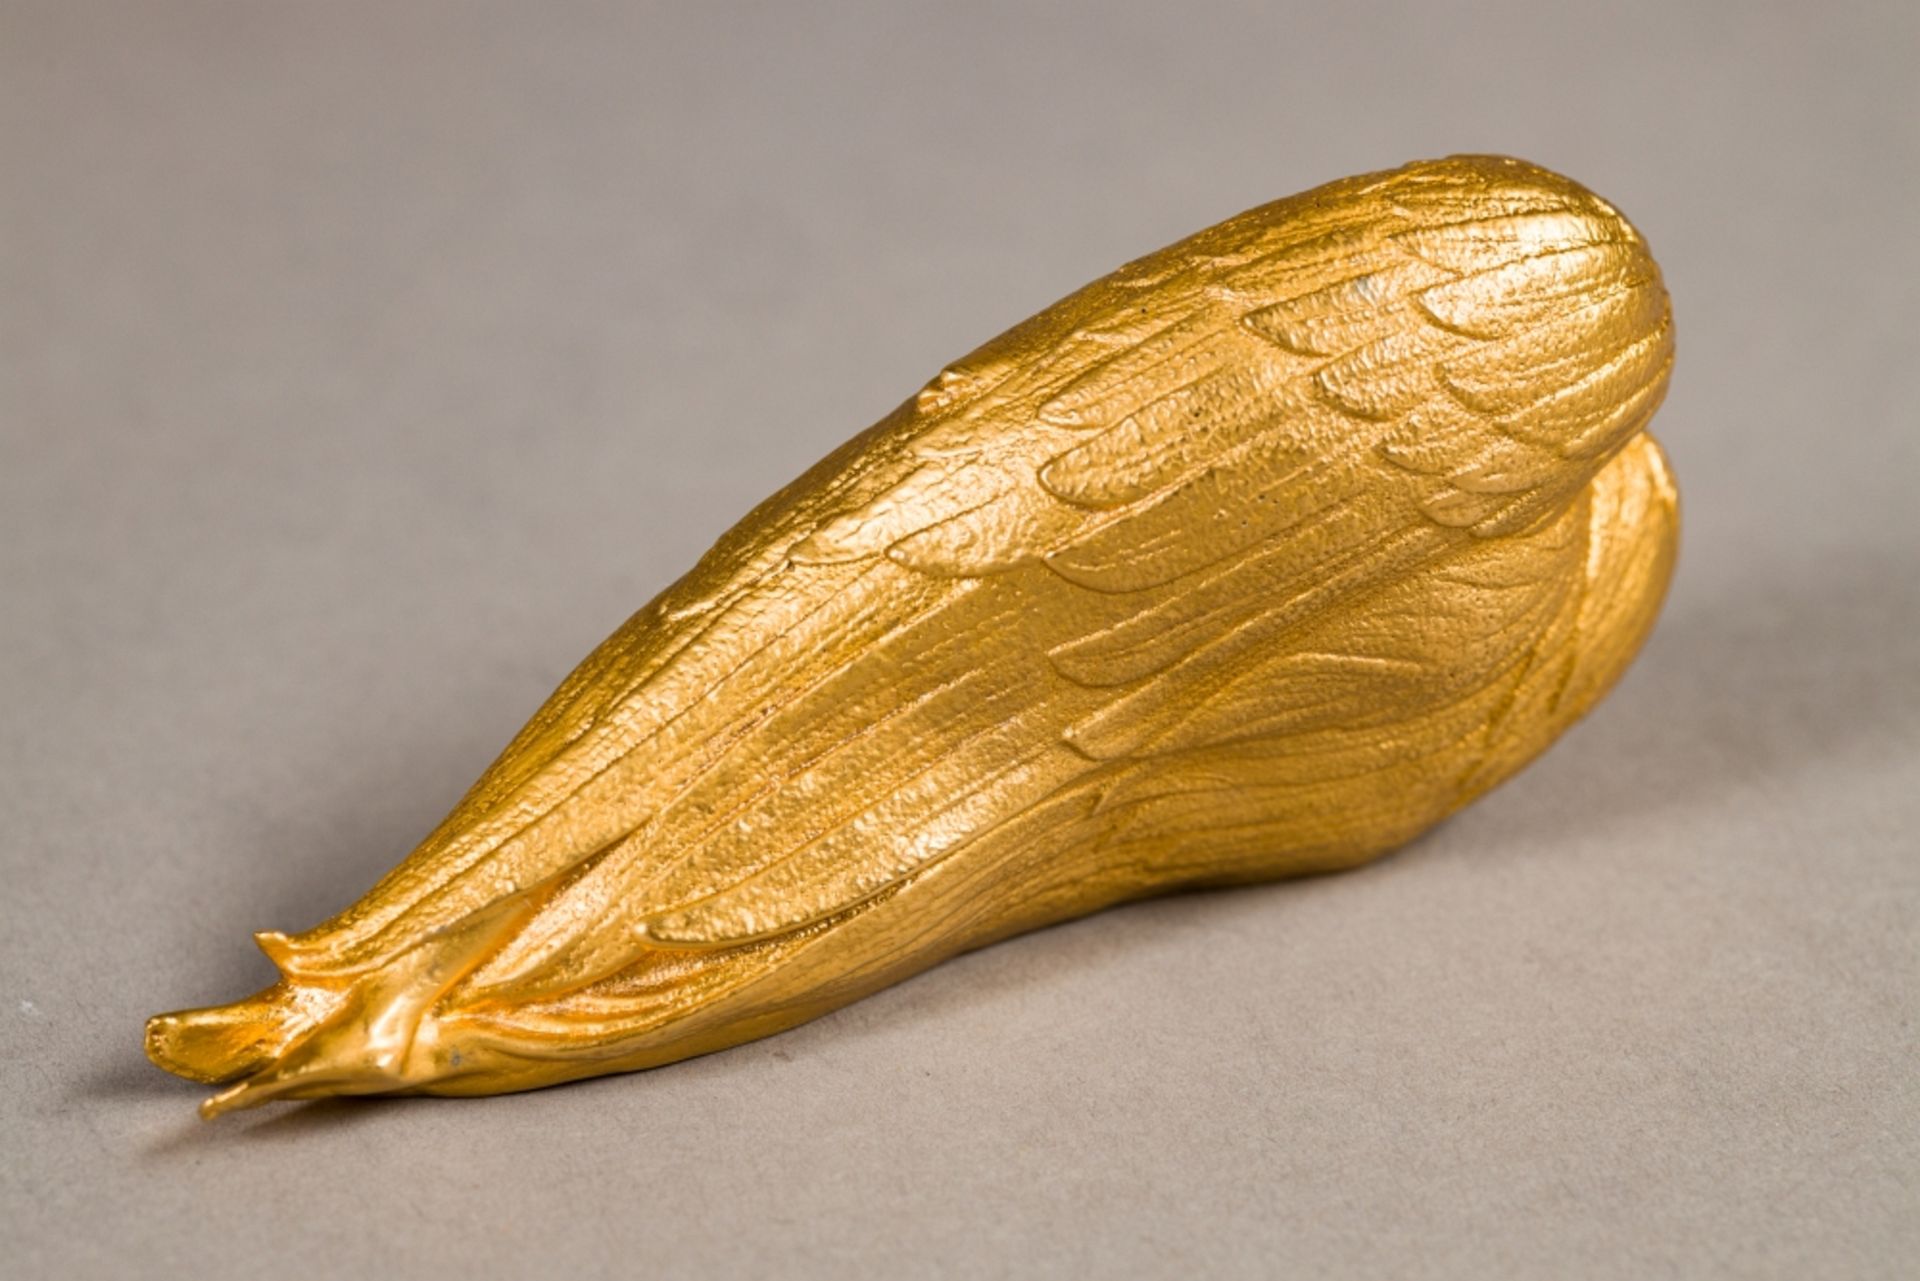 Fuchs, Ernst (1930 - 2015) Guardian Angel, 2013 Gold-plated Metal Casting made of Tin Alloy Signed - Image 3 of 5